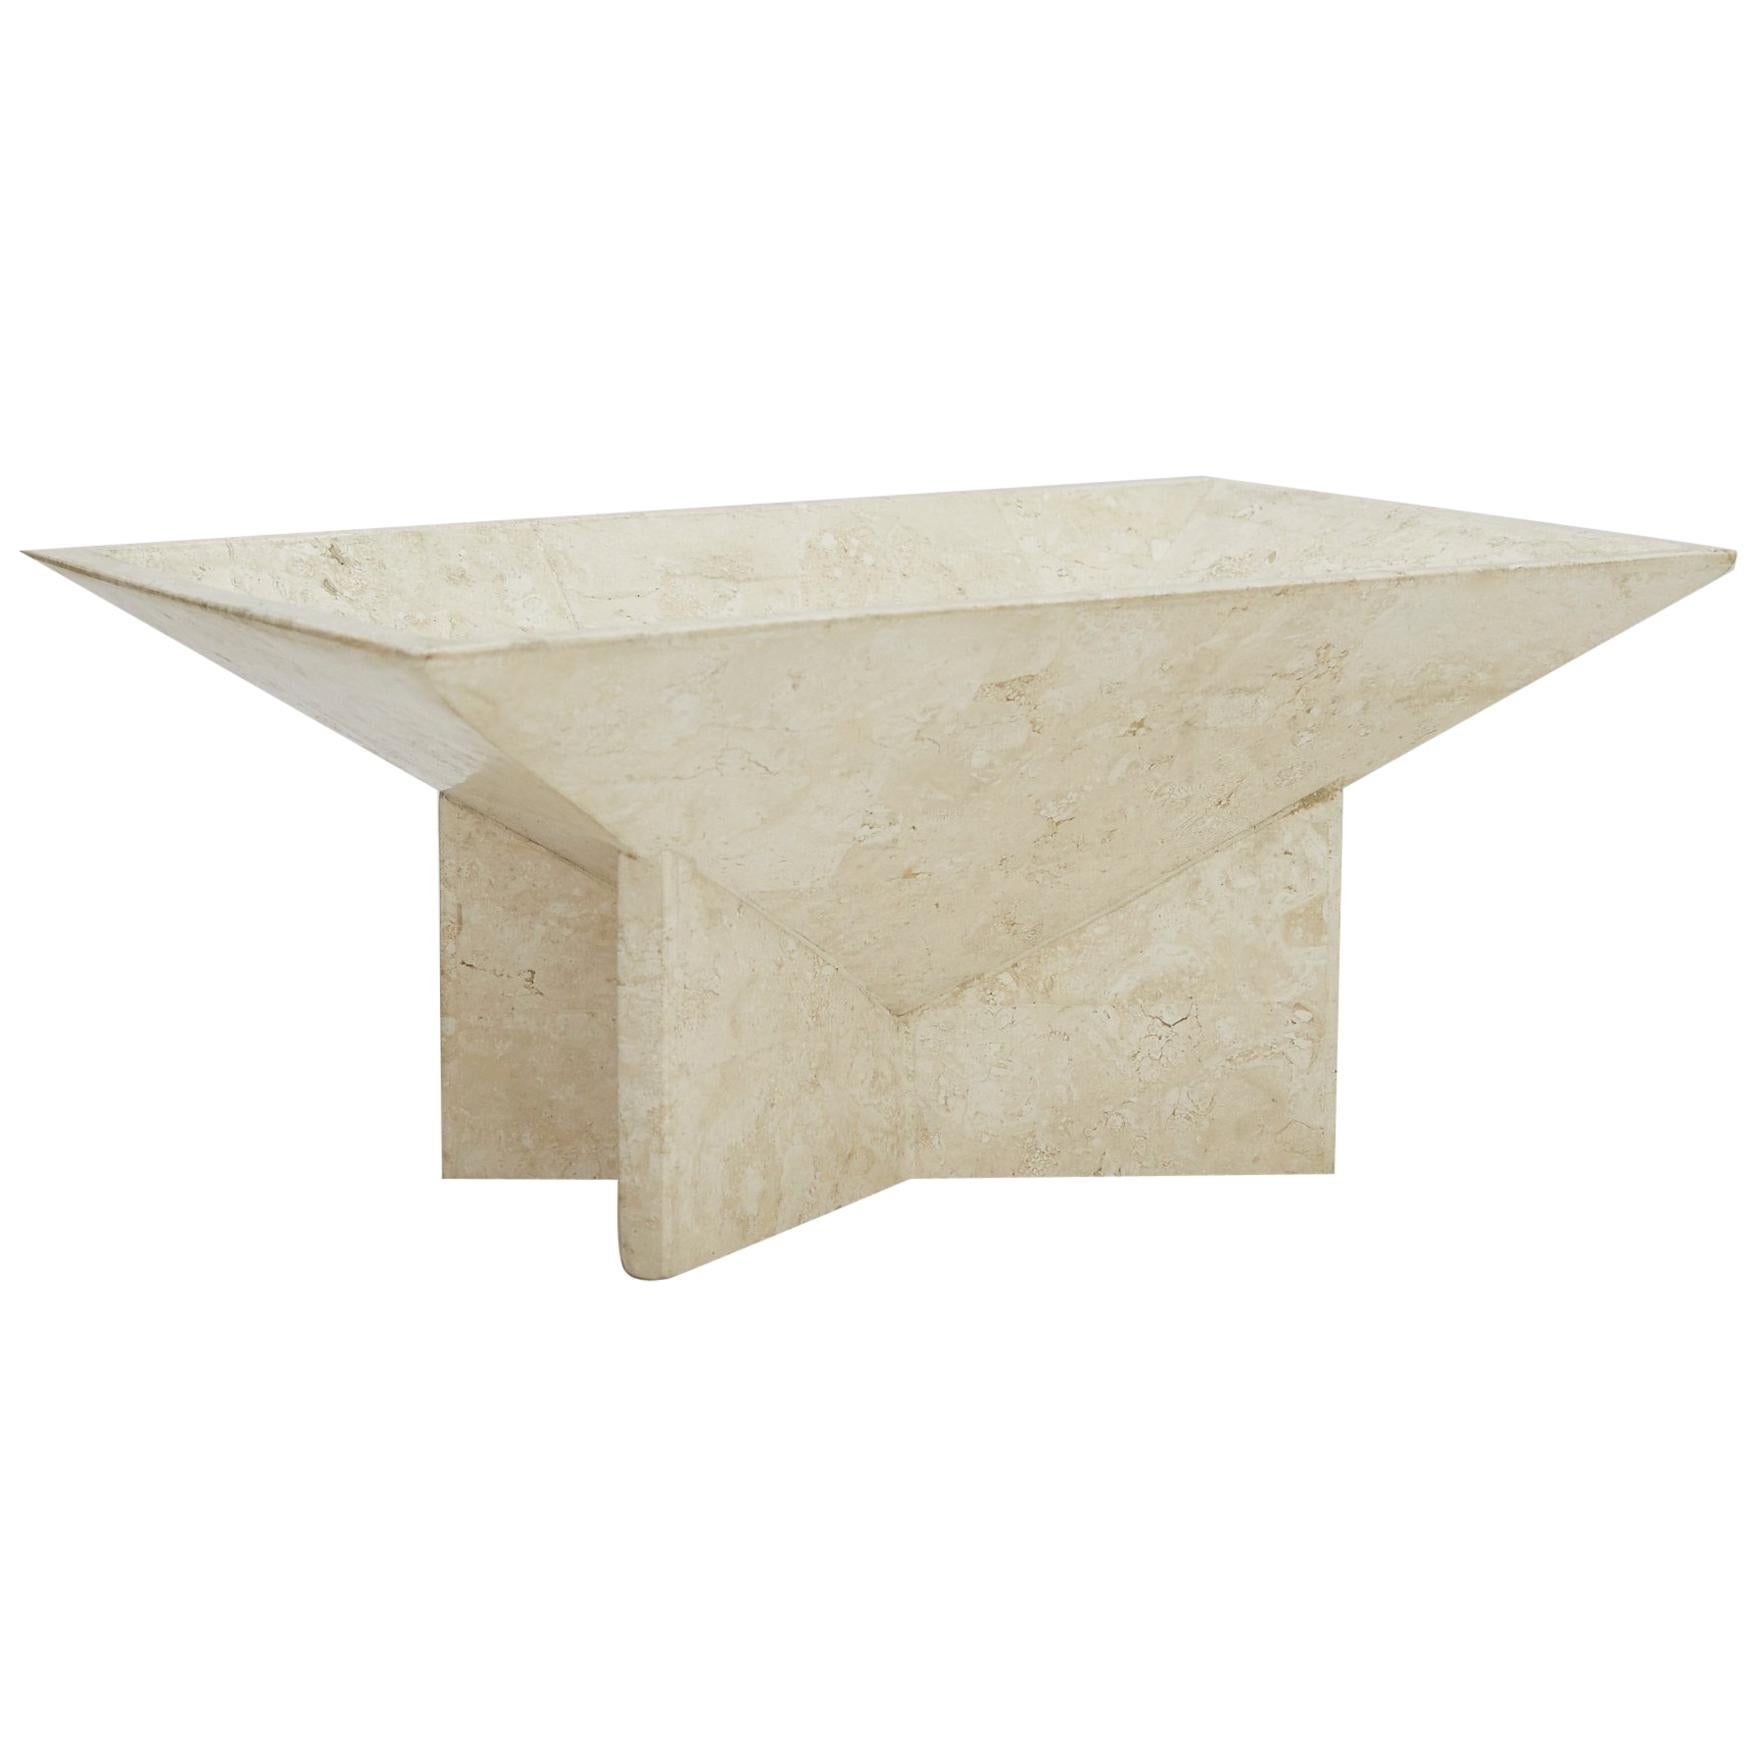 Rectangular Tessellated Stone Bowl on Elevated Base, 1990s For Sale